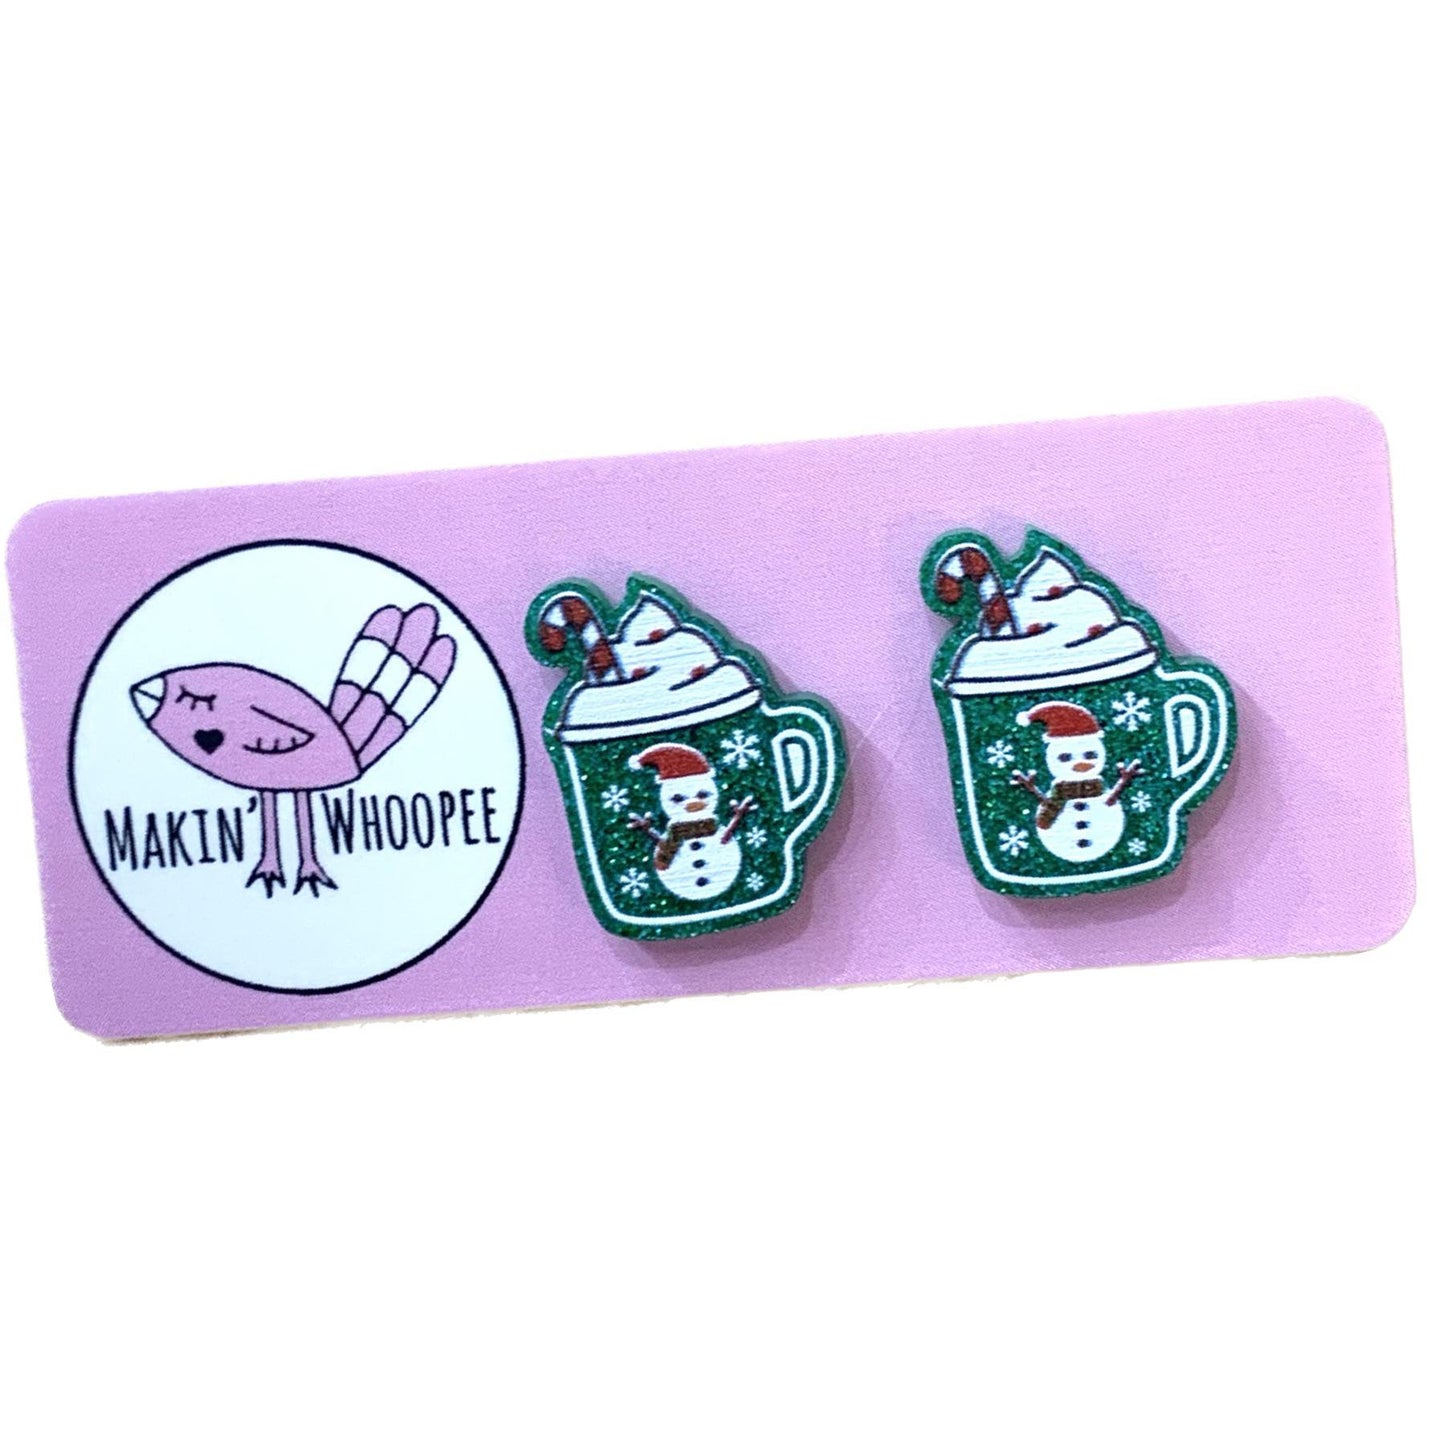 MAKIN' WHOOPEE - "Cup of Cheer" STUDS